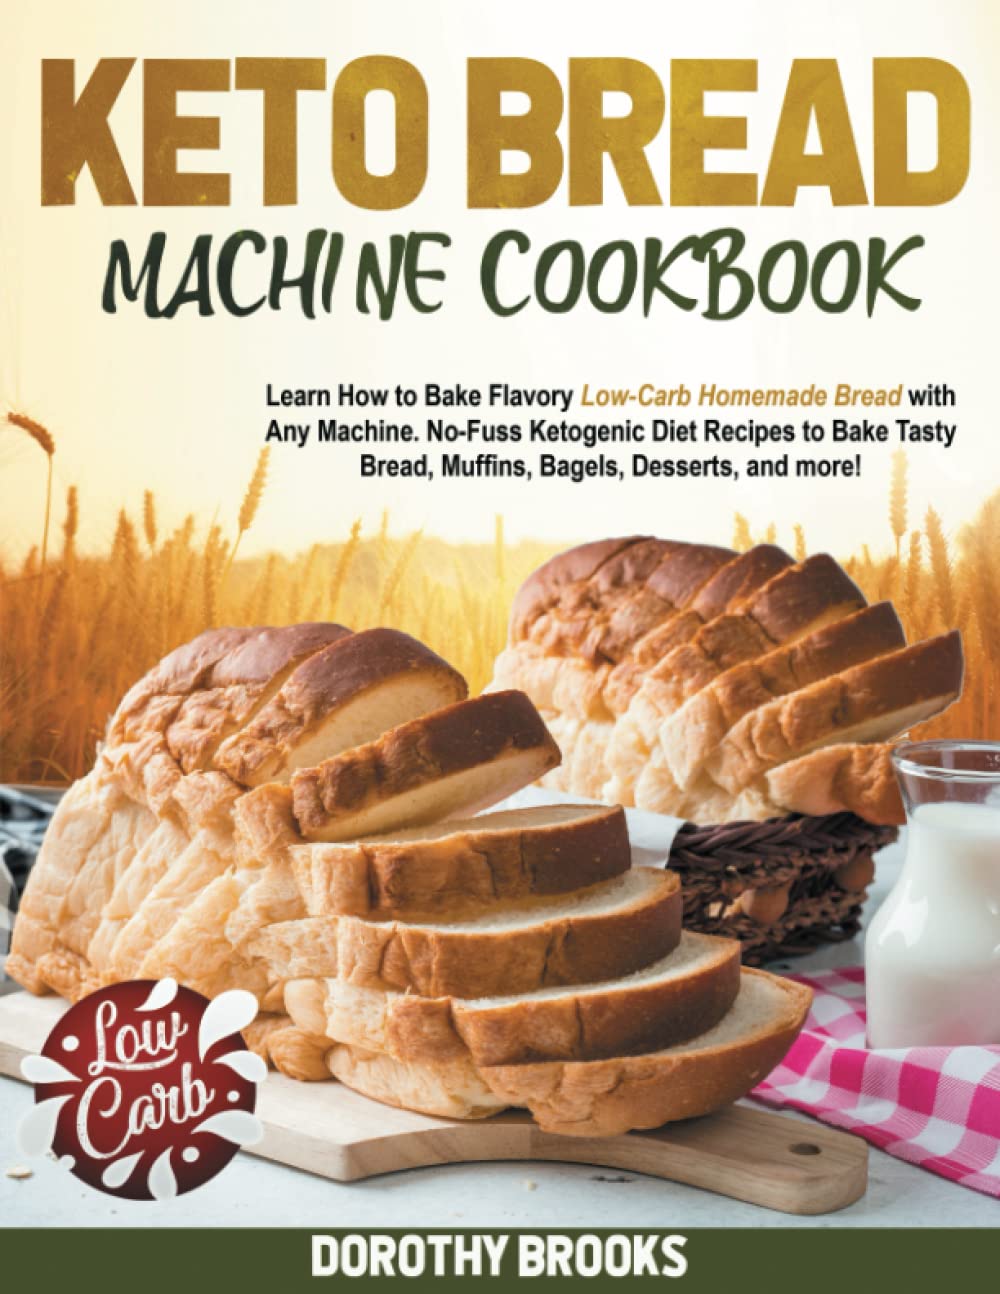 Keto Bread Machine Cookbook: Learn How to Bake Flavory Low-Carb Homemade Bread with Any Machine. No-Fuss Ketogenic Diet Recipes to Bake Tasty Bread, Muffins, Bagels, Desserts, and more!